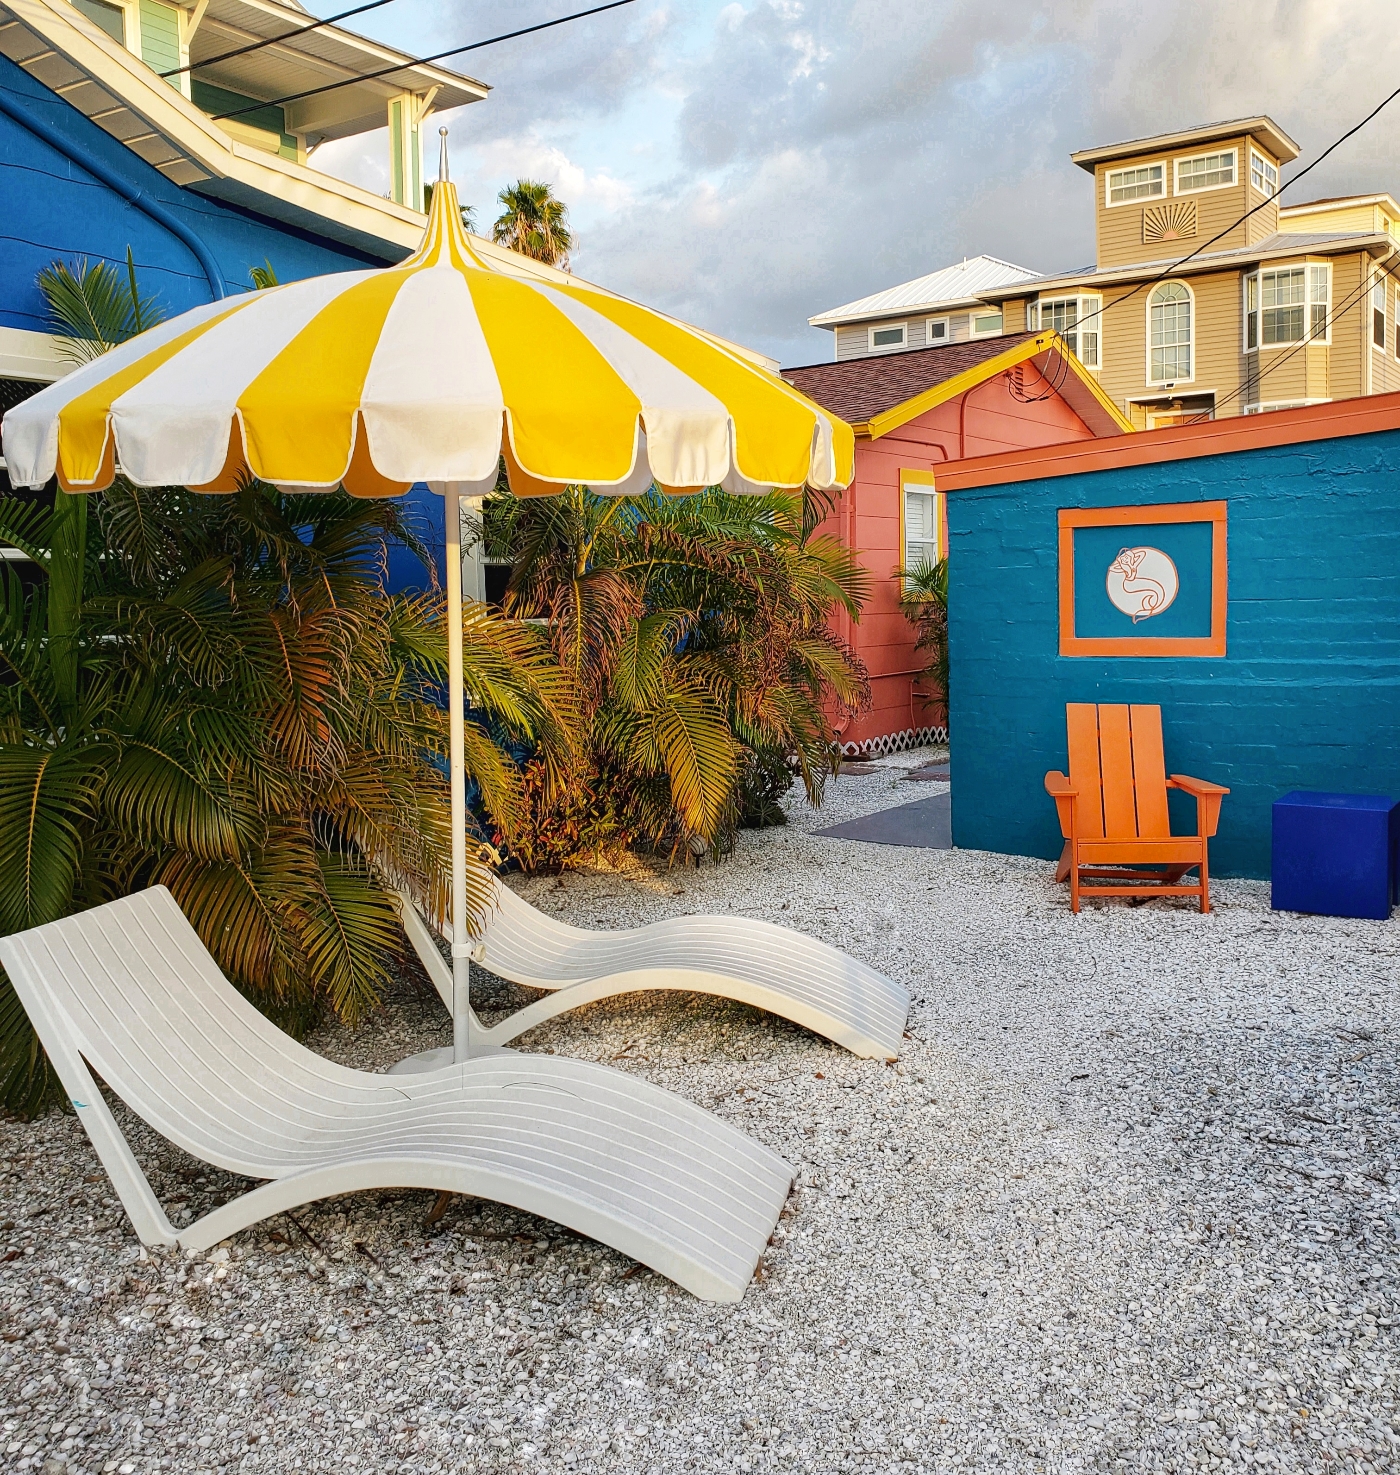 Sunset Inn Treasure Island, one of the intimate fun courtyards with striped umbrella, chairs, surrounded by colorful cottages